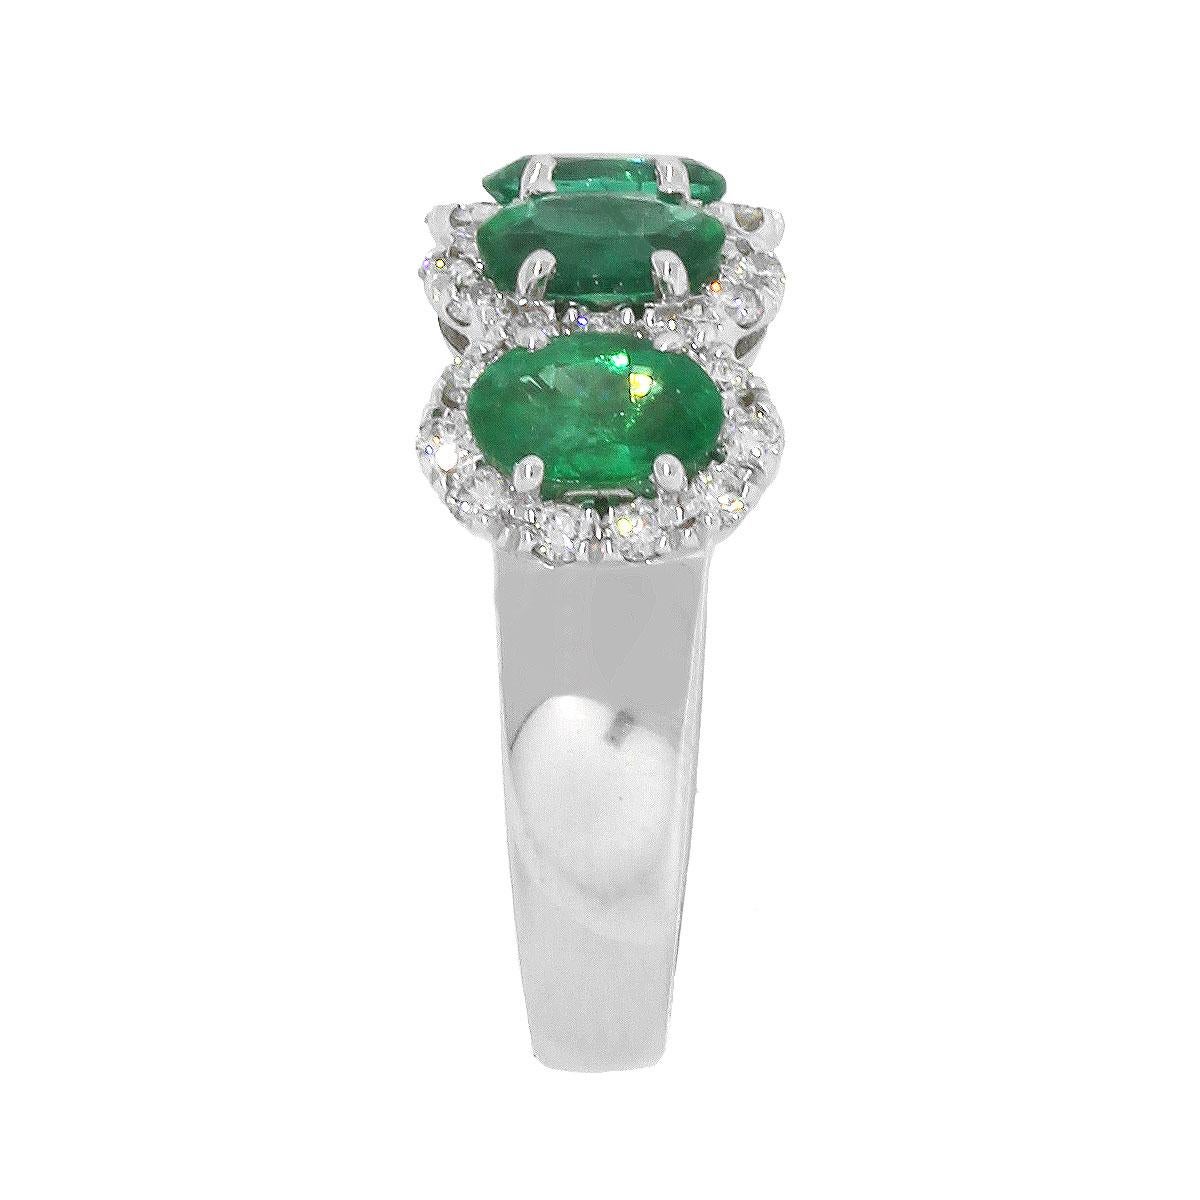 Material: 18k white gold
Emerald Details: 5 stones, Approximately 2.01ctw of Oval Cut Emeralds.
Round Diamond Details: Approximately 0.53ctw of round brilliant diamonds. Diamonds are G/H in color and SI in clarity
Size: 6.25
Total Weight: 6.7g